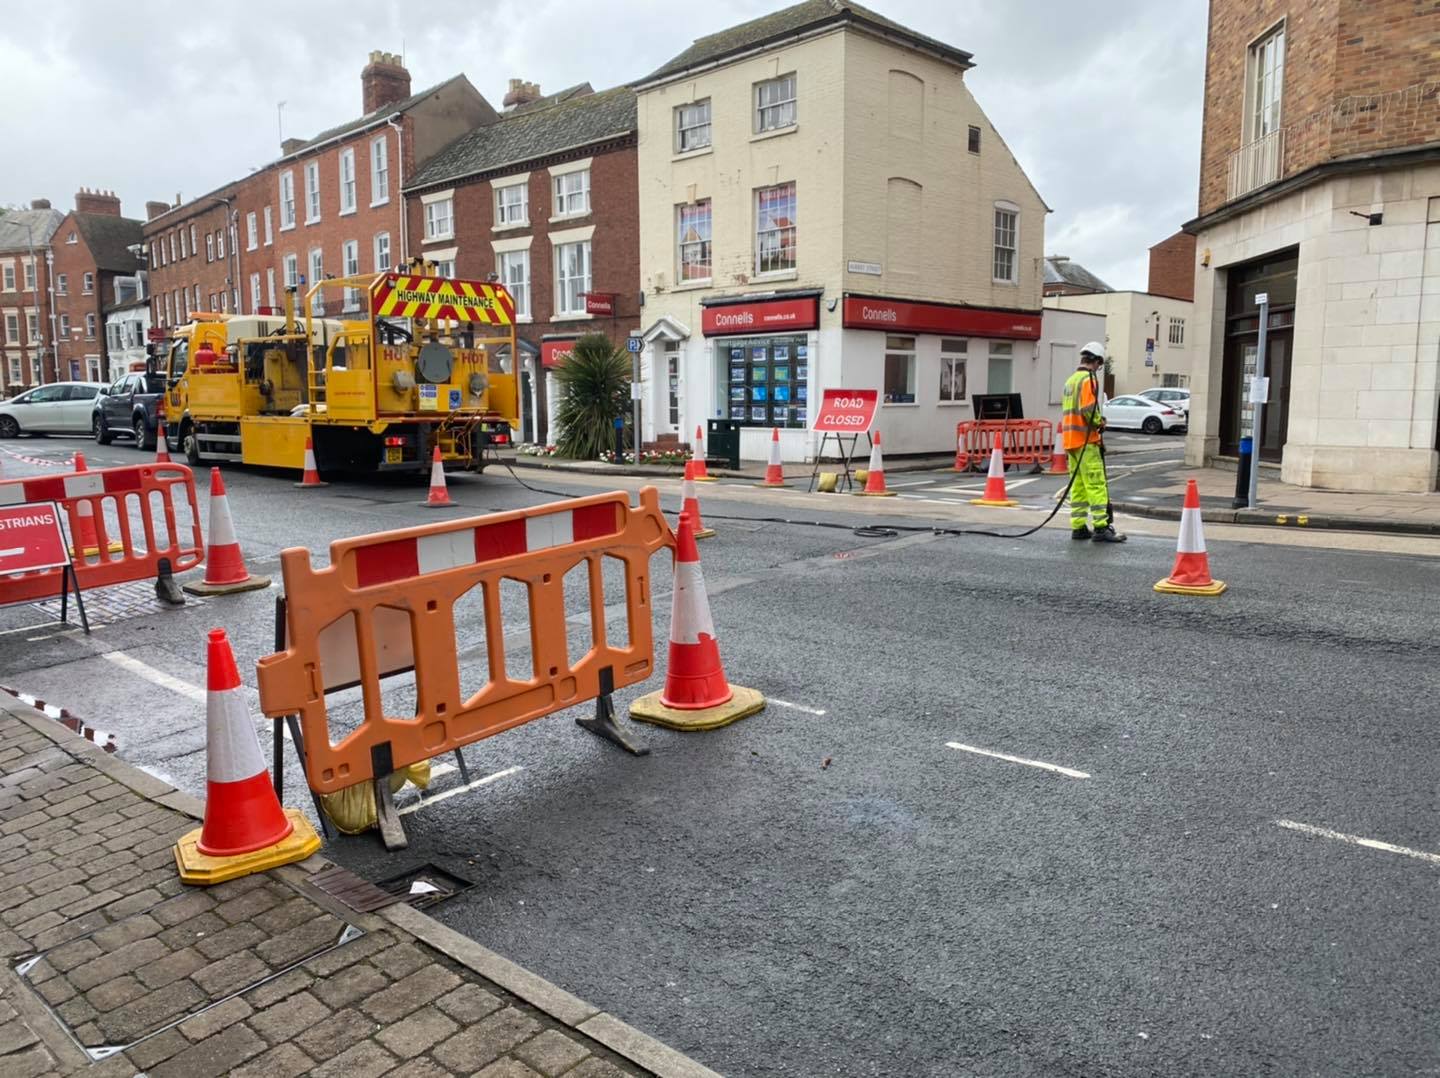 NEWS | Making more space to move around Hereford safely – Council insists it is listening